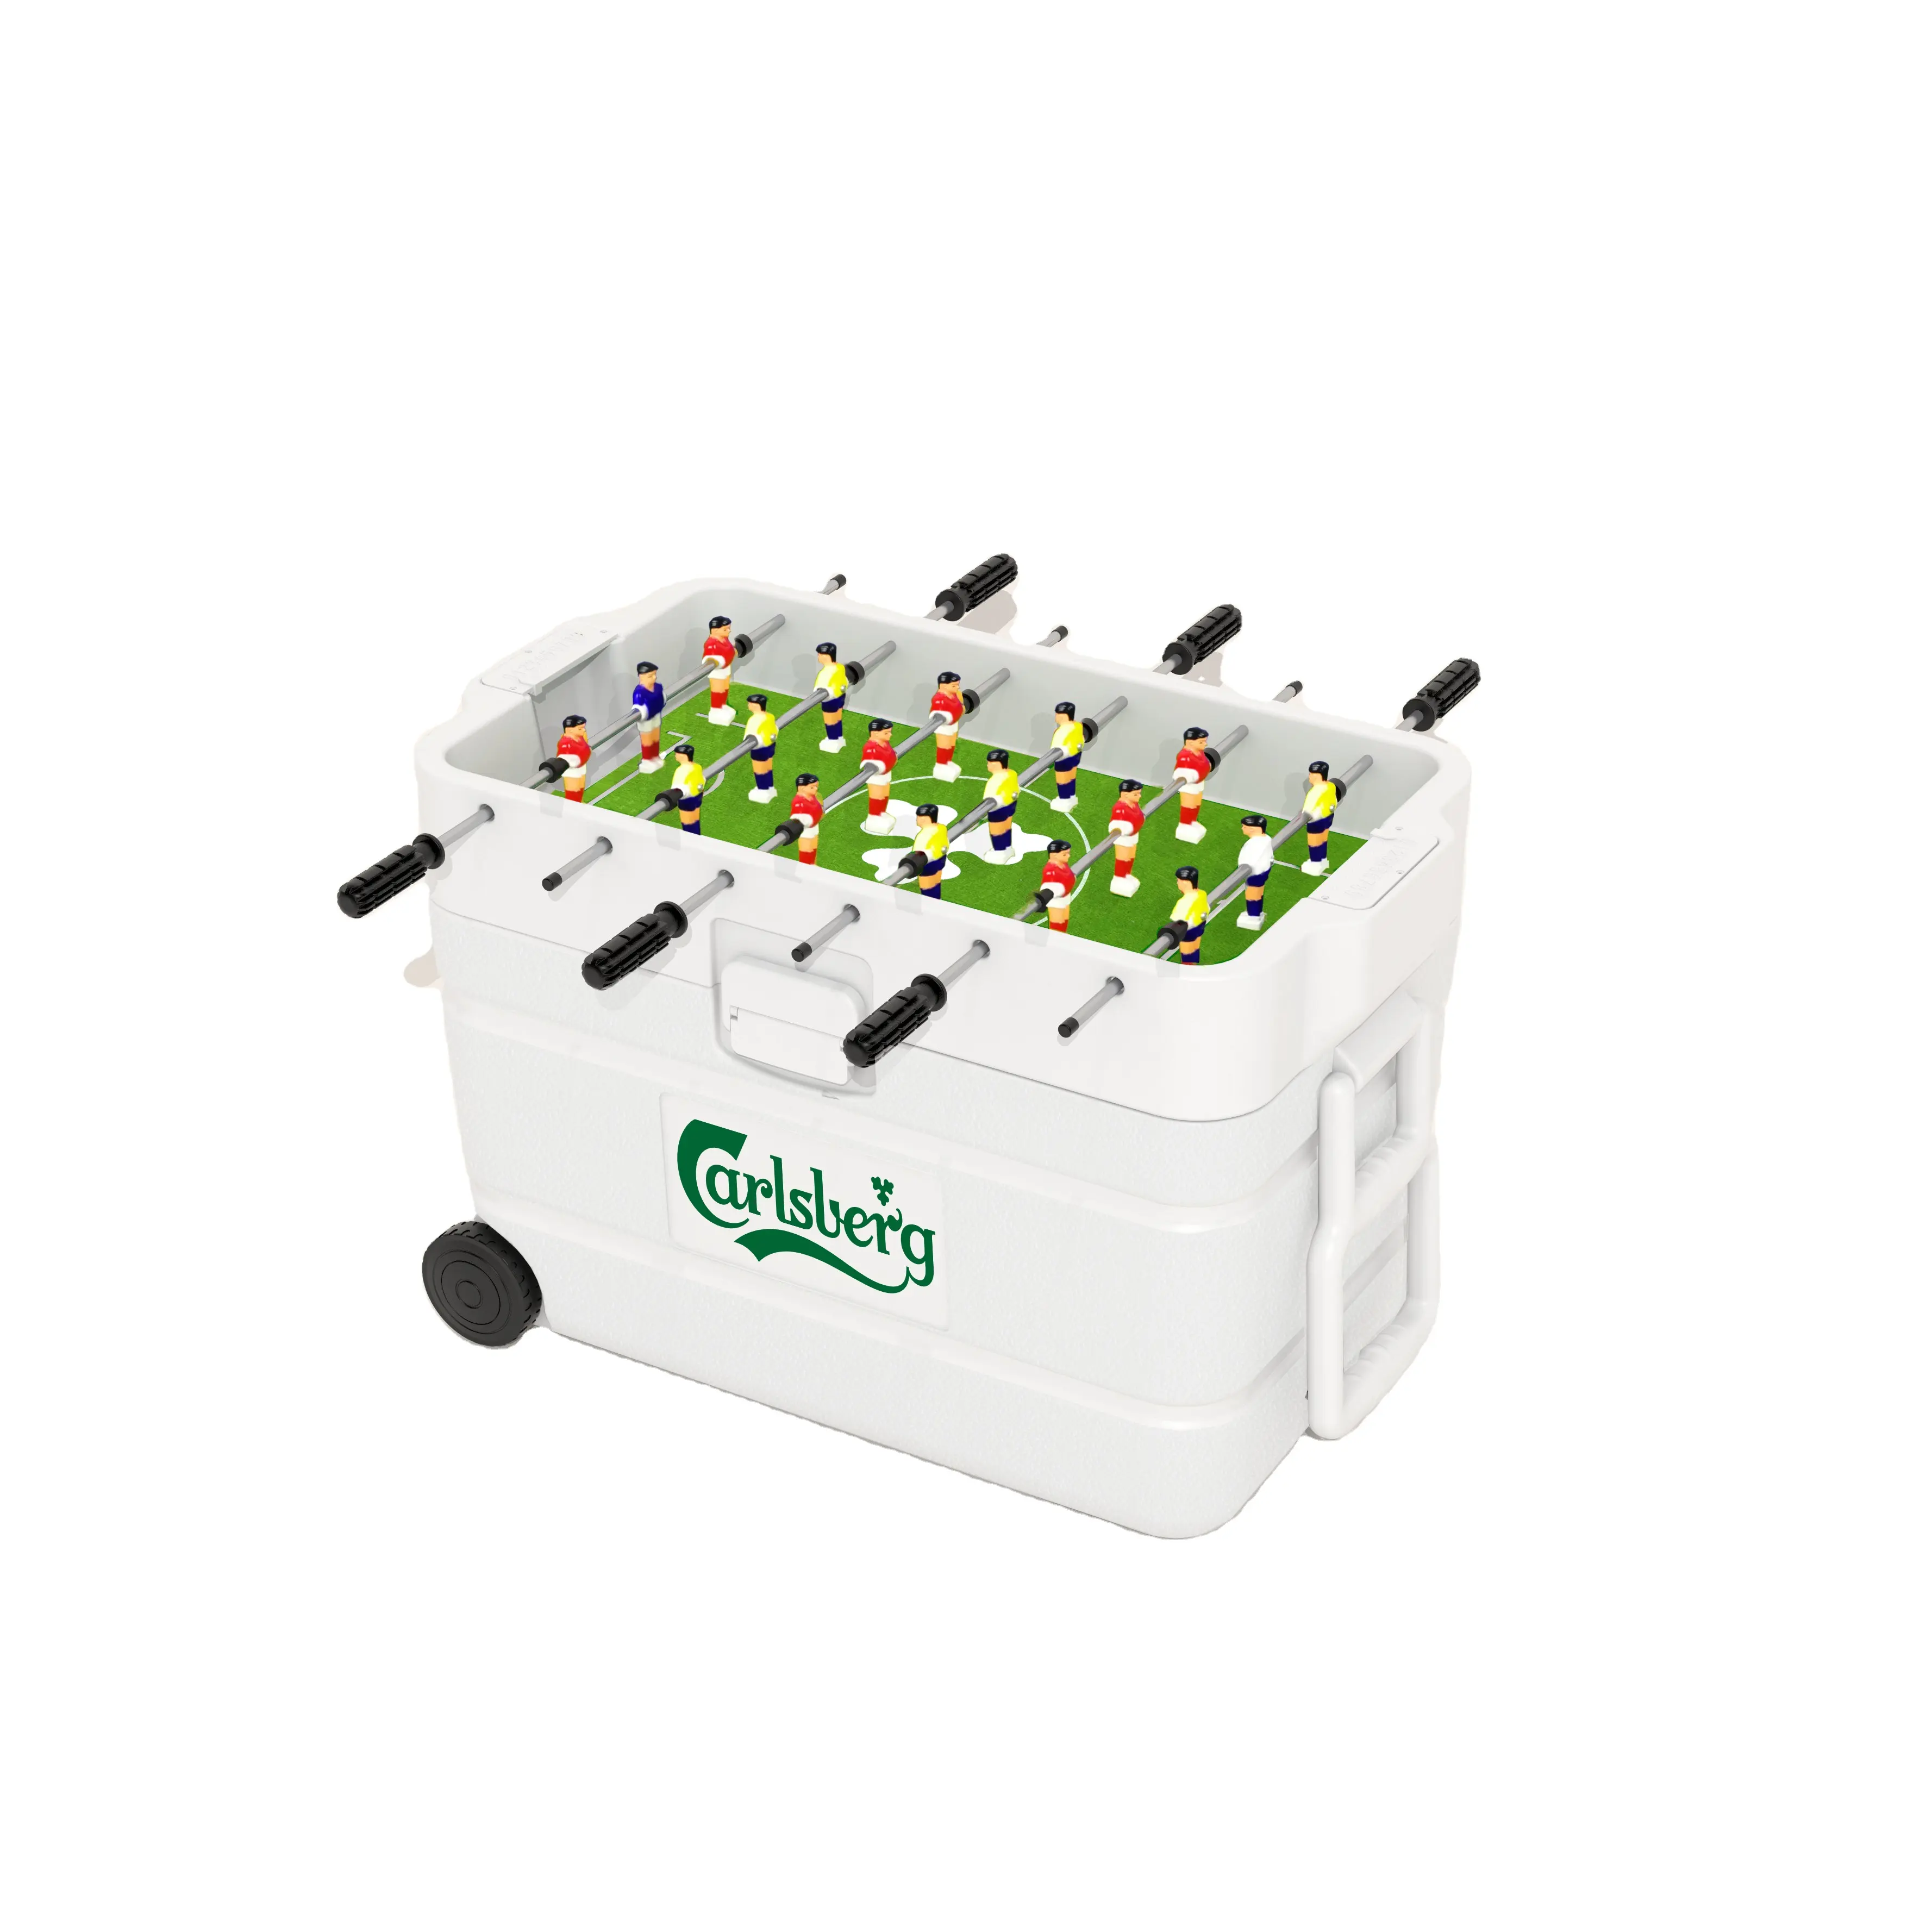 Ice cooler box with foosball table game, Trolley cooler cart for picnic